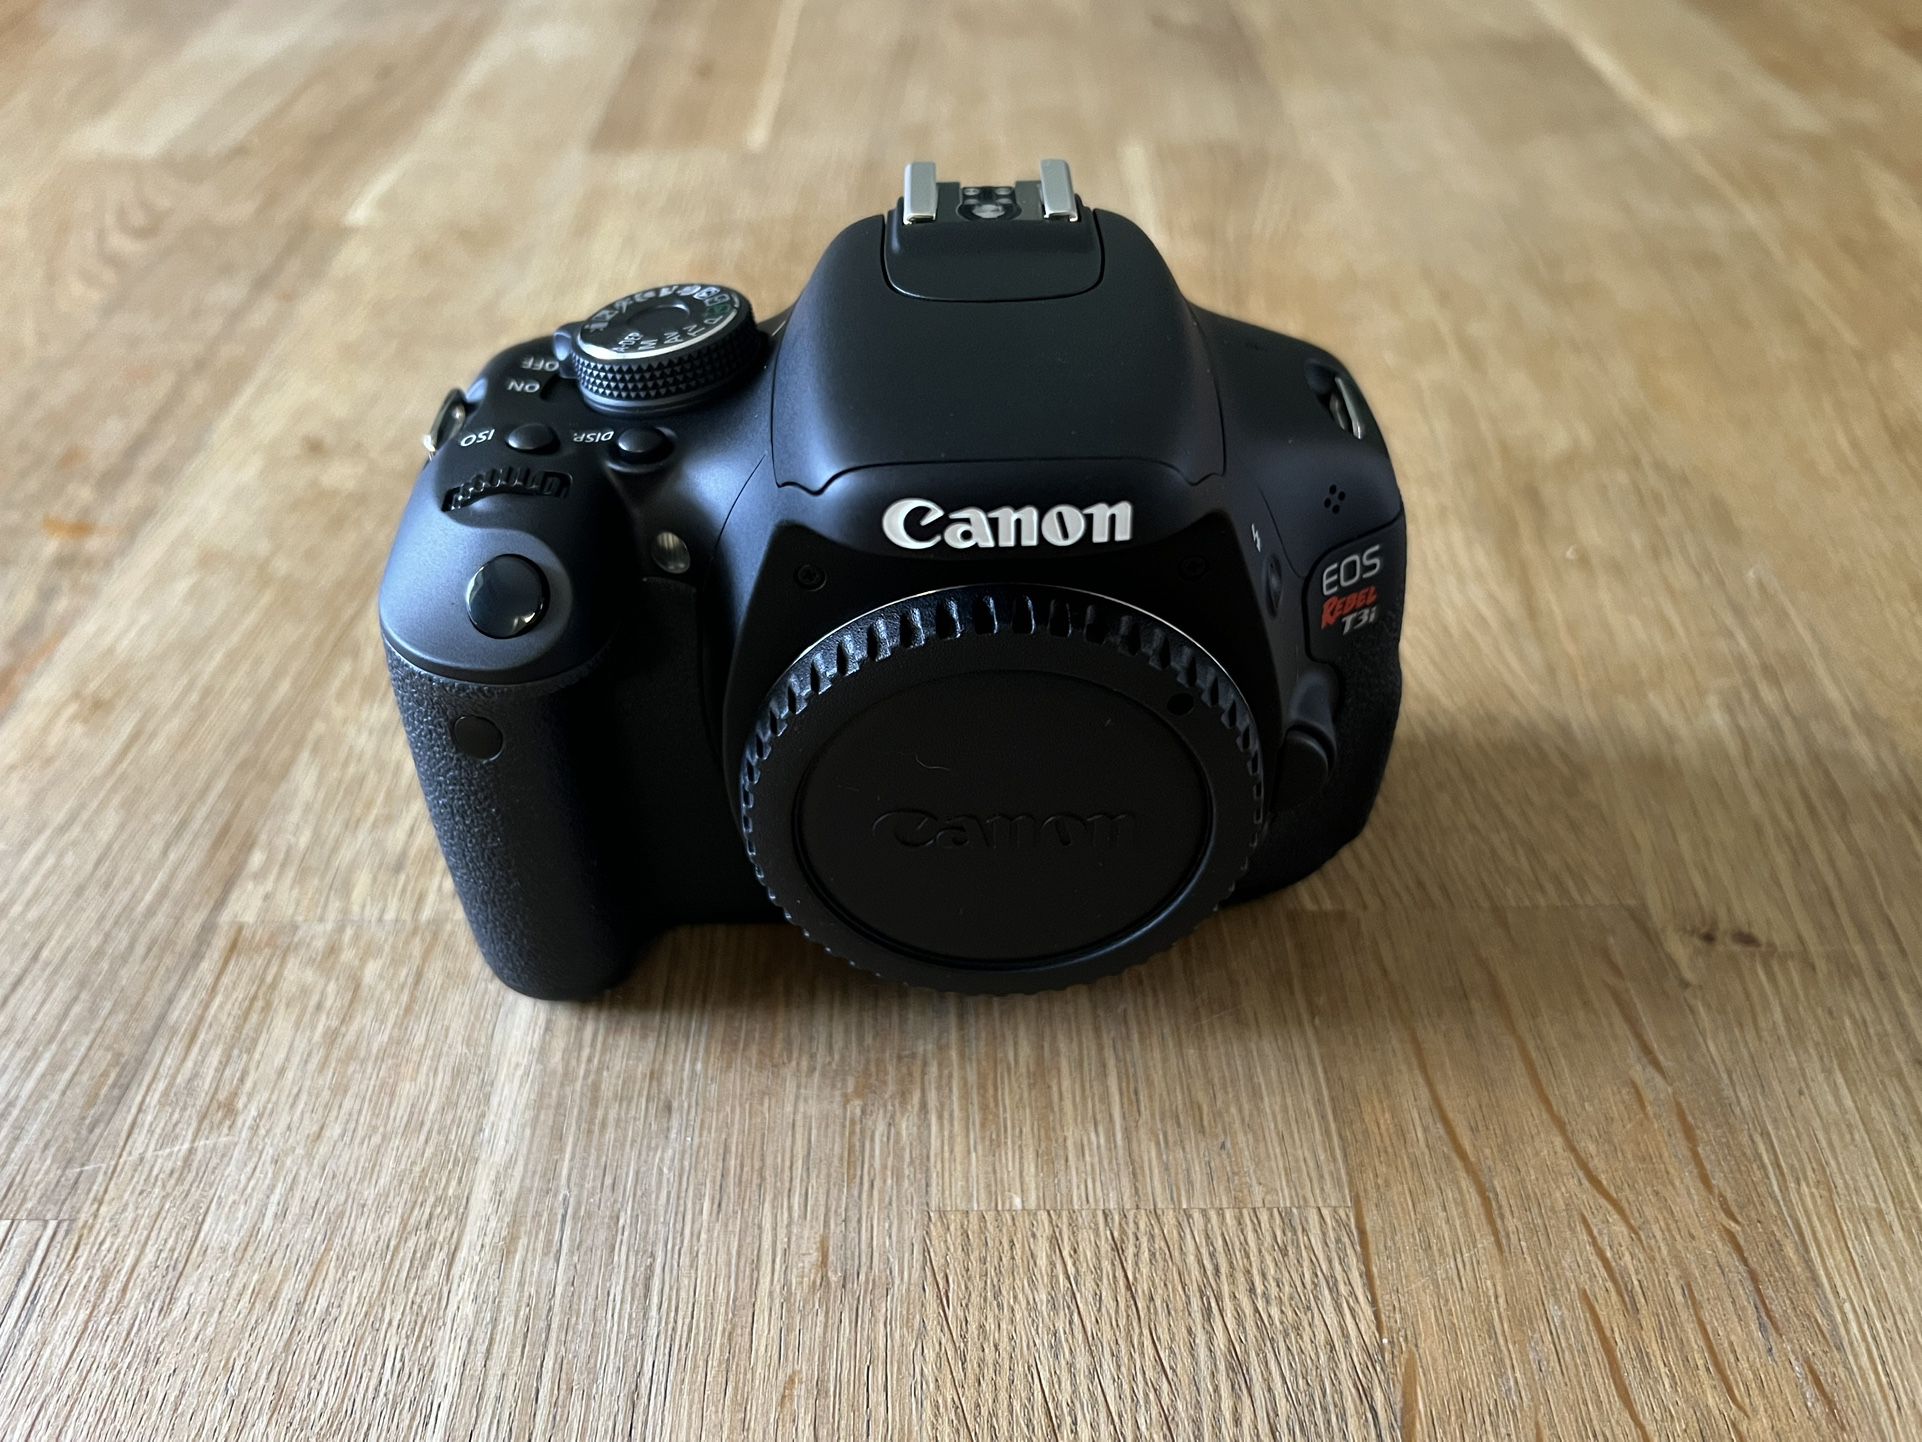 Canon Rebel T3i EOS 600D Camera - New With A Case